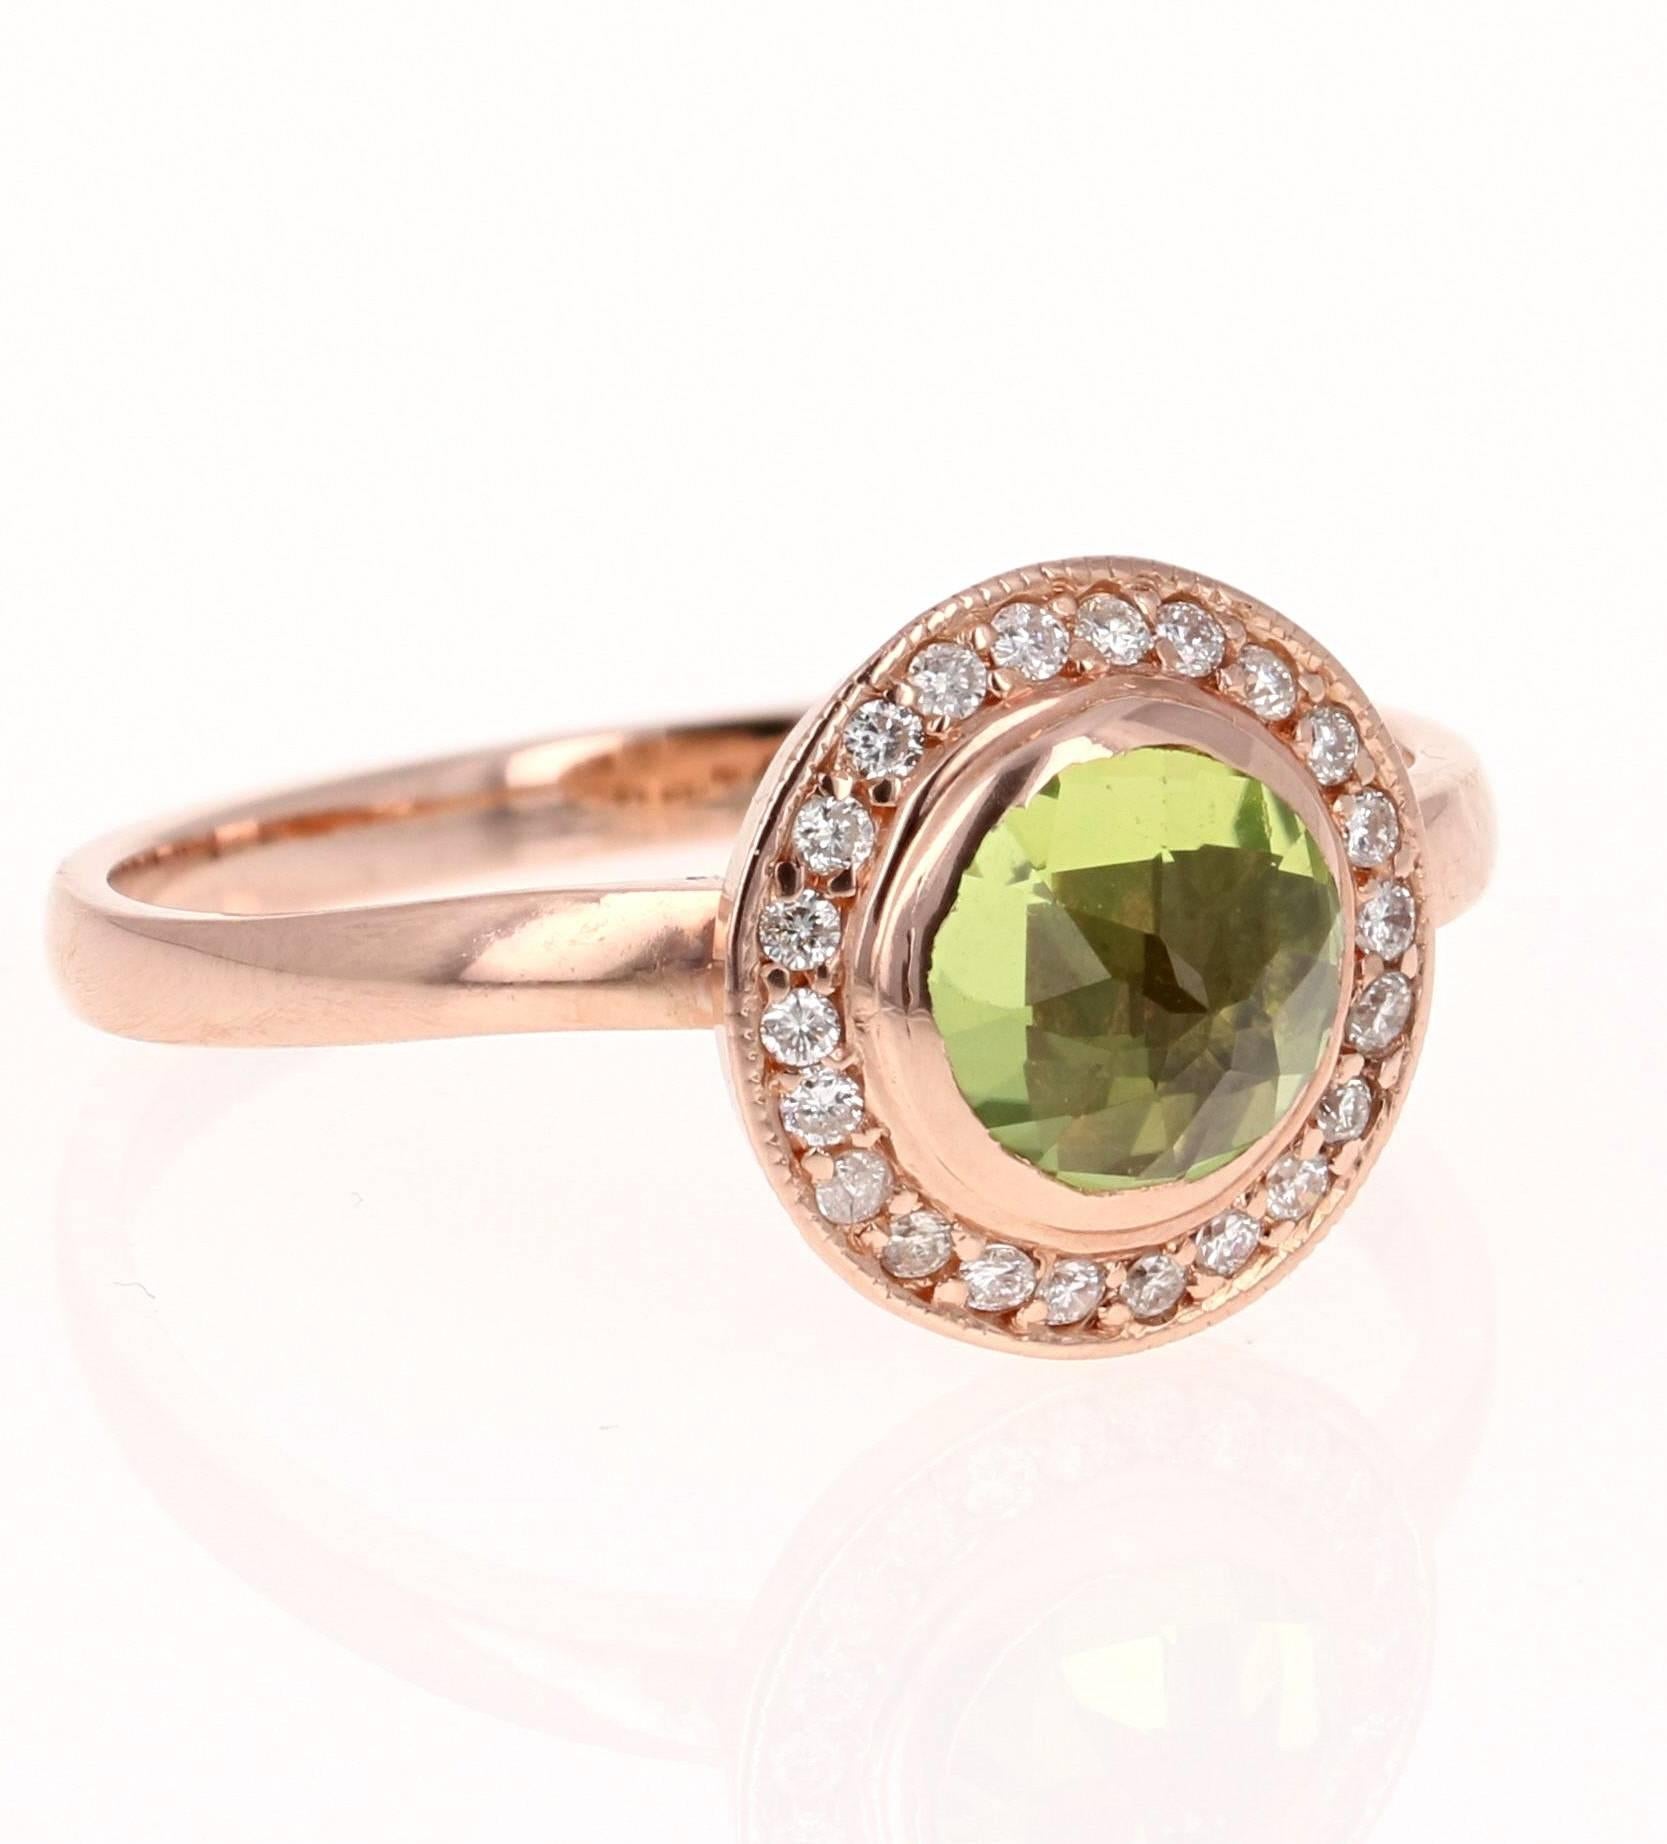 This beautiful ring has a Round Cut Peridot in the center that weighs 0.84 carats. The ring is surrounded by a cute halo of 22 Round Cut Diamonds that weigh 0.15 carats. The total carat weight of the ring is 0.99 carats. The setting is crafted in